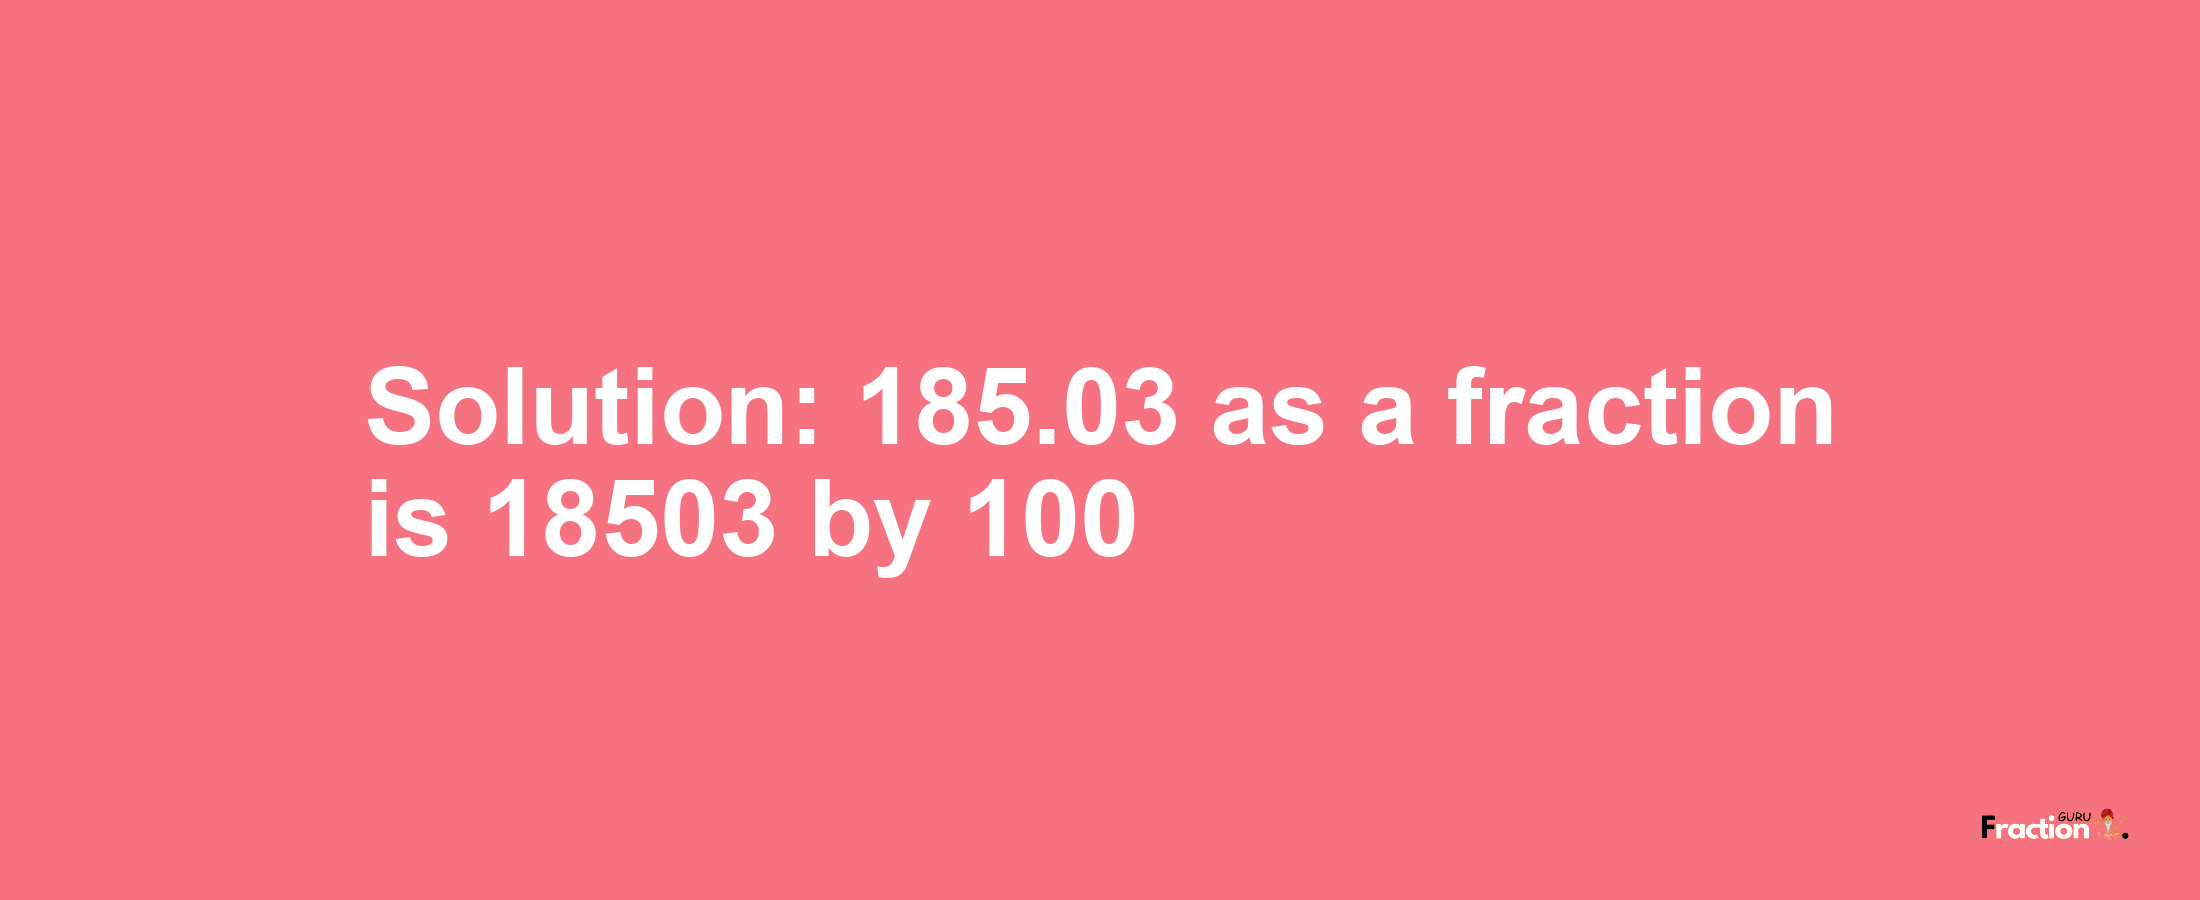 Solution:185.03 as a fraction is 18503/100